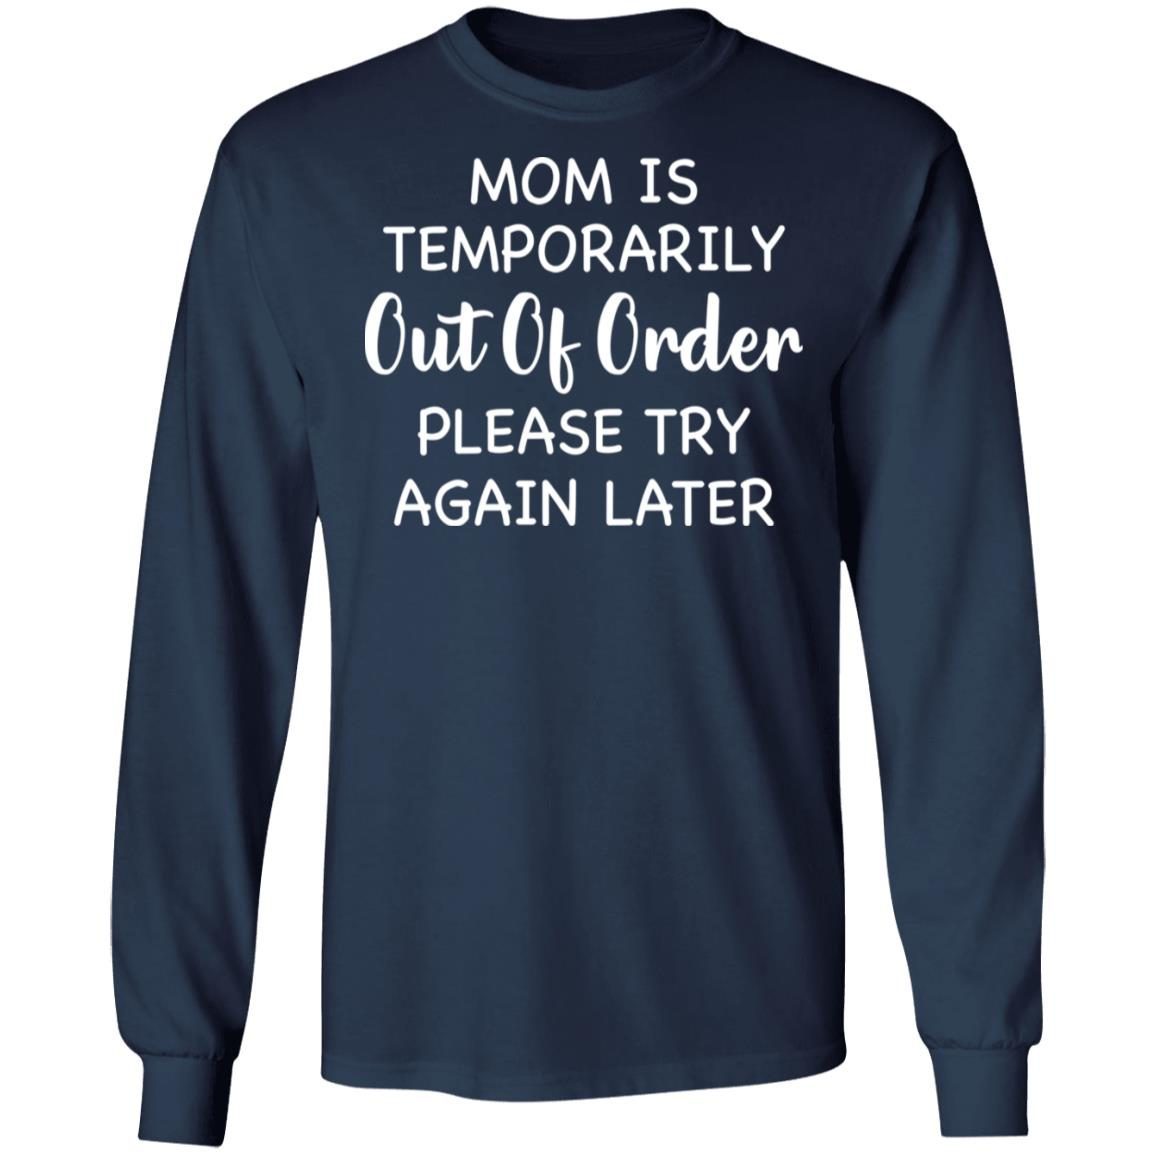 Mom is temporarily out of order please try again later shirt 4